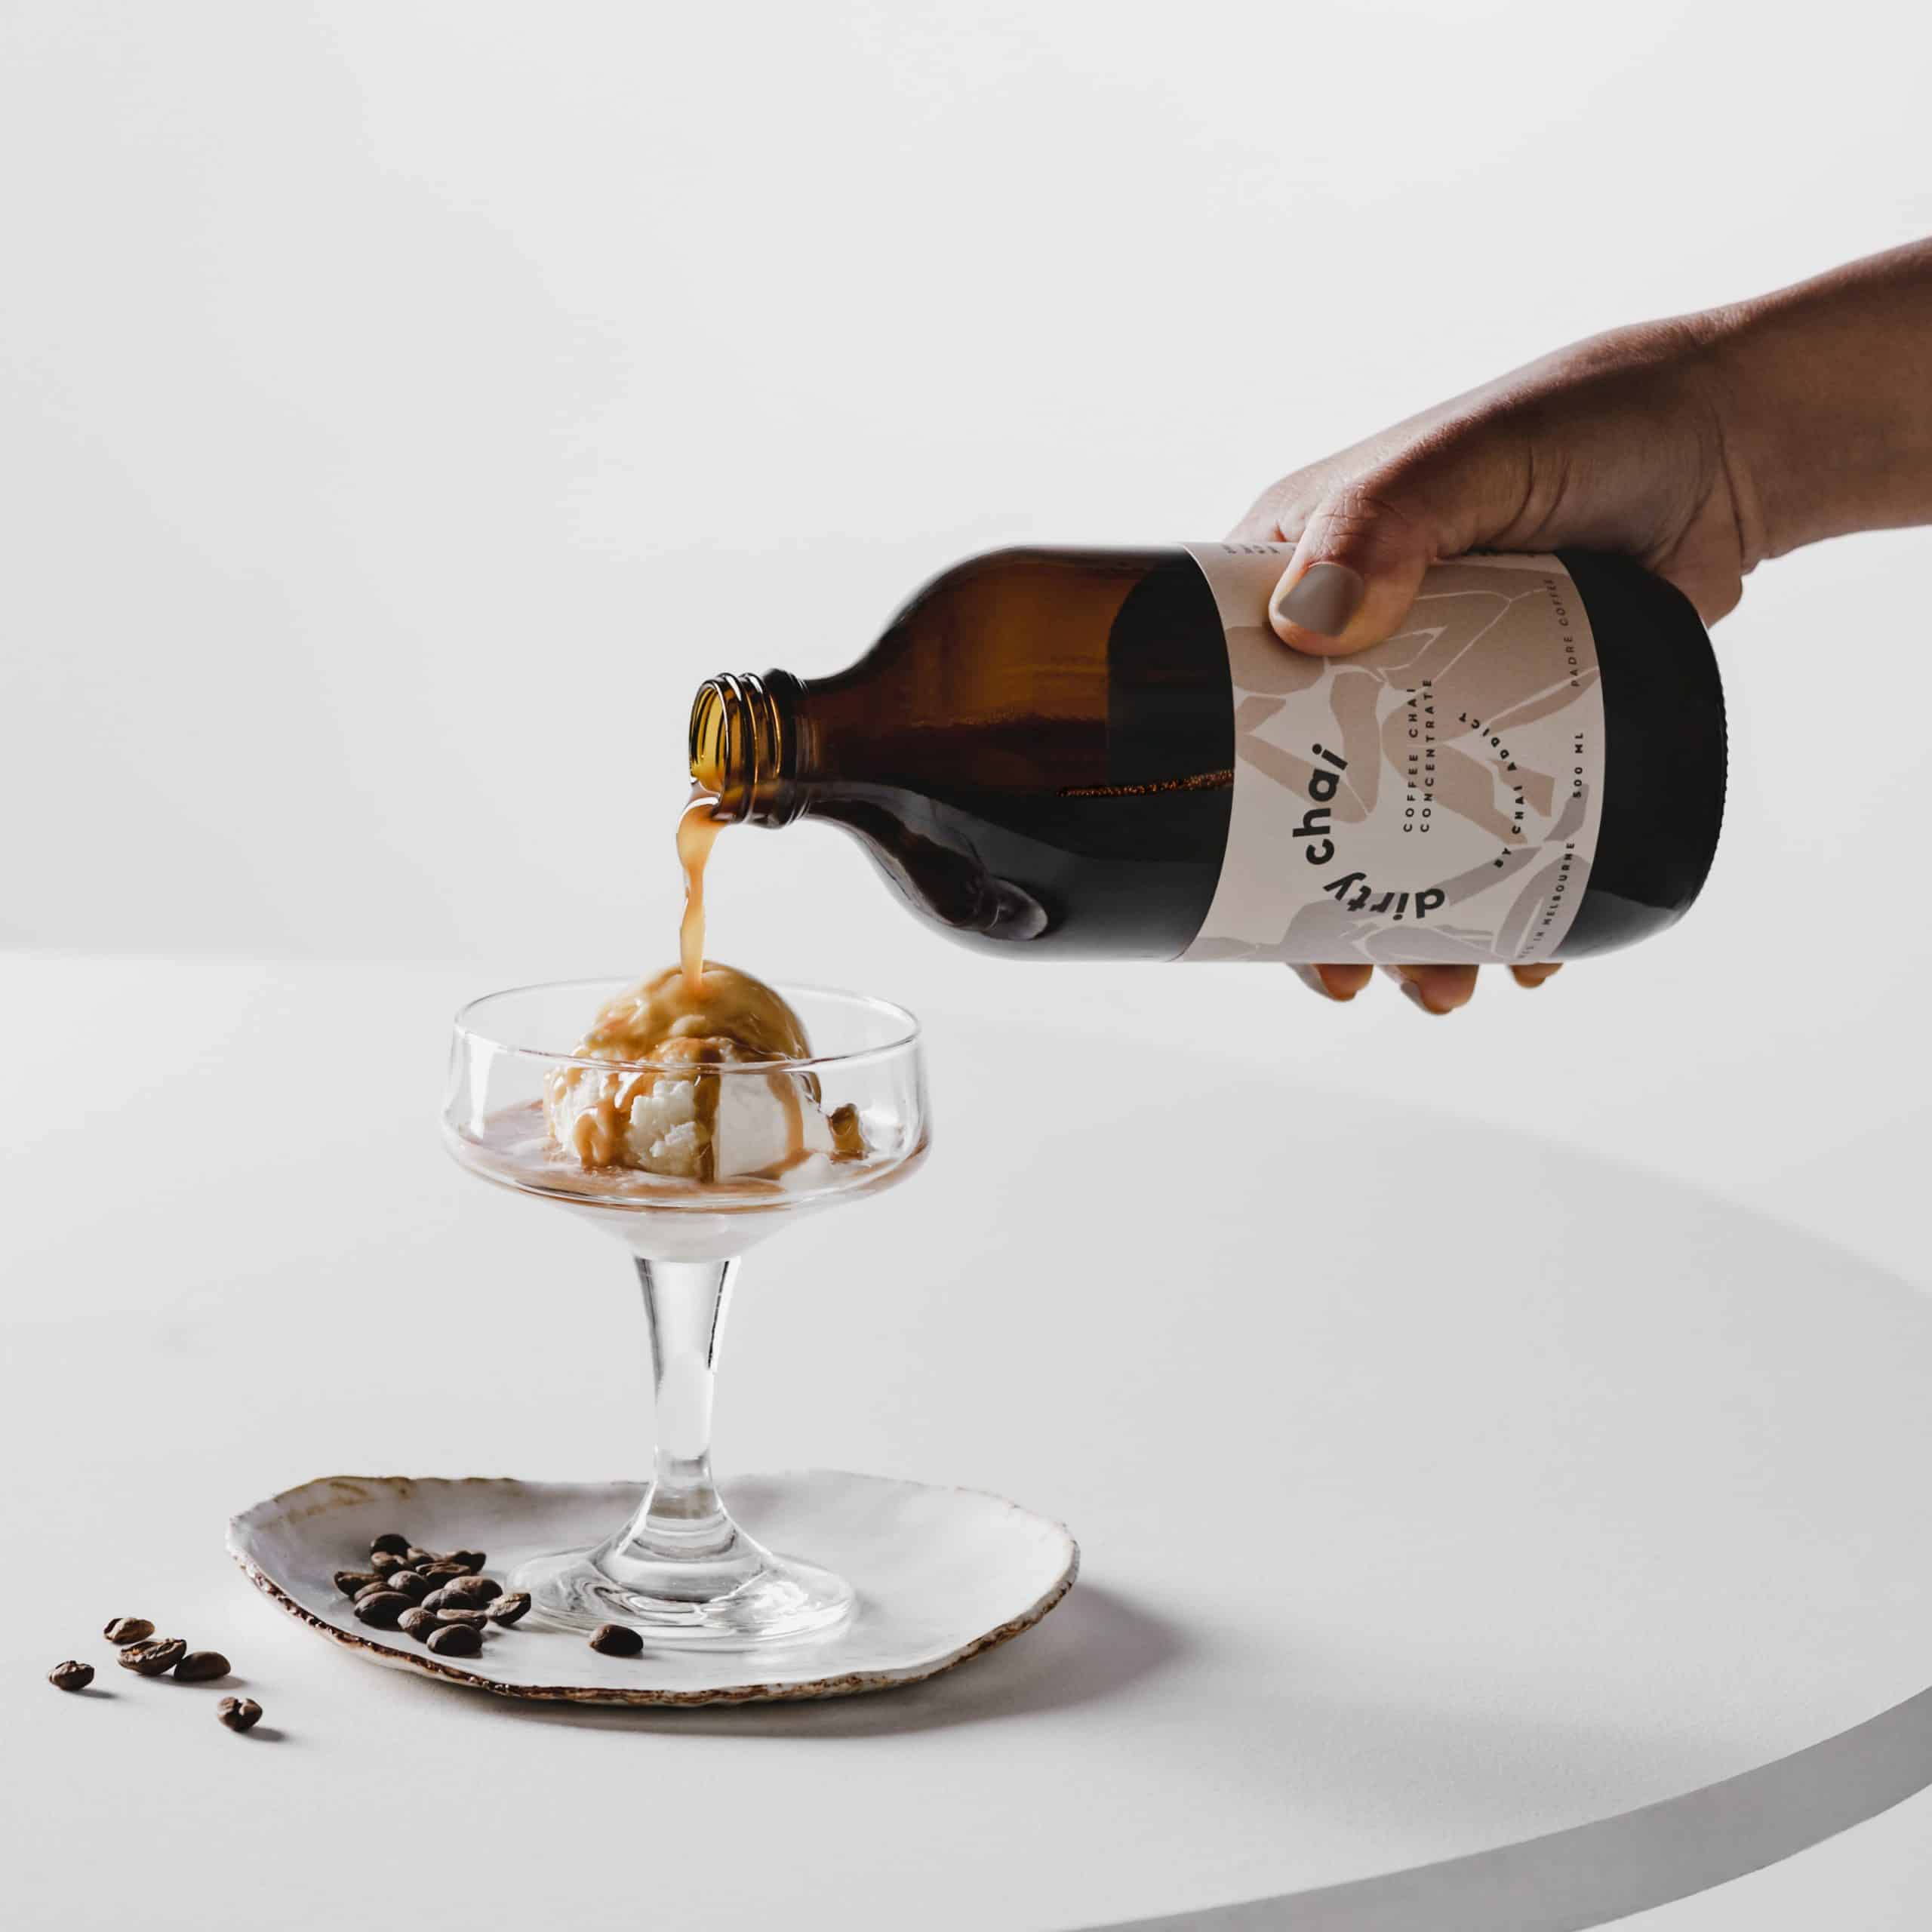 dirty chai concentrate being poured over ice cream in a fancy glass to make an affogato dessert